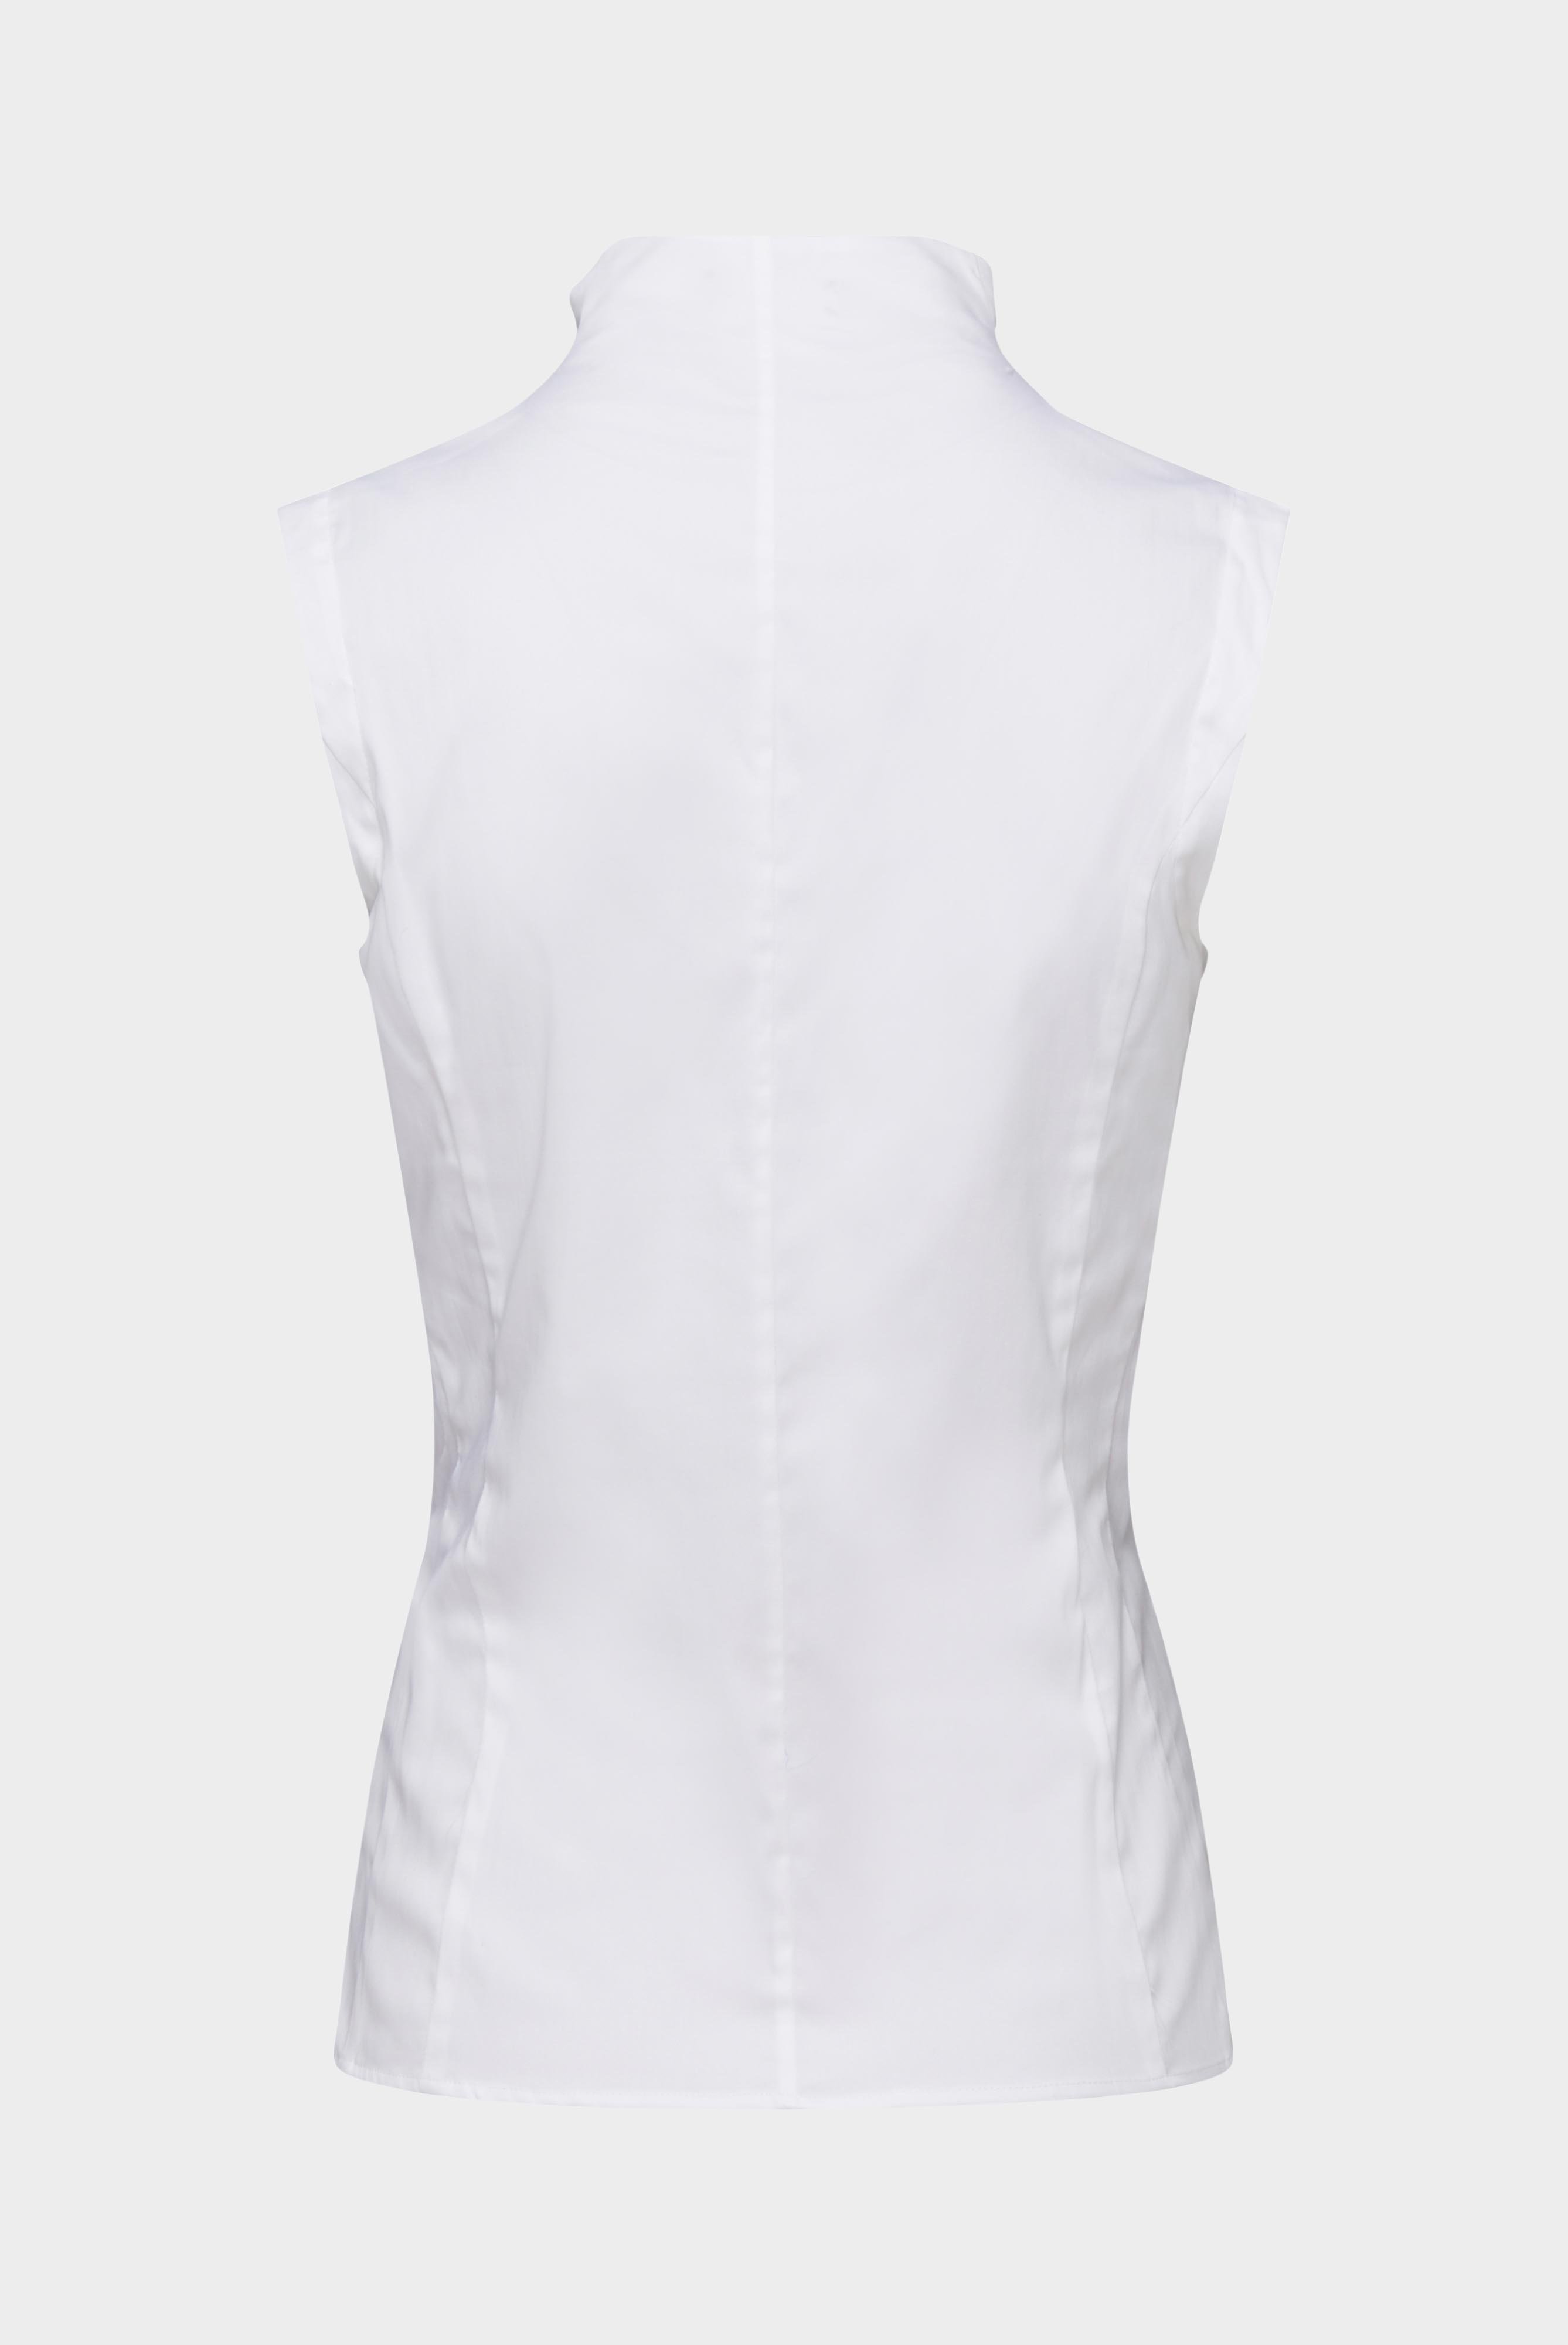 Business Blouses+Sleevless Chalice Collar Blouse+05.5857.73.130830.000.32